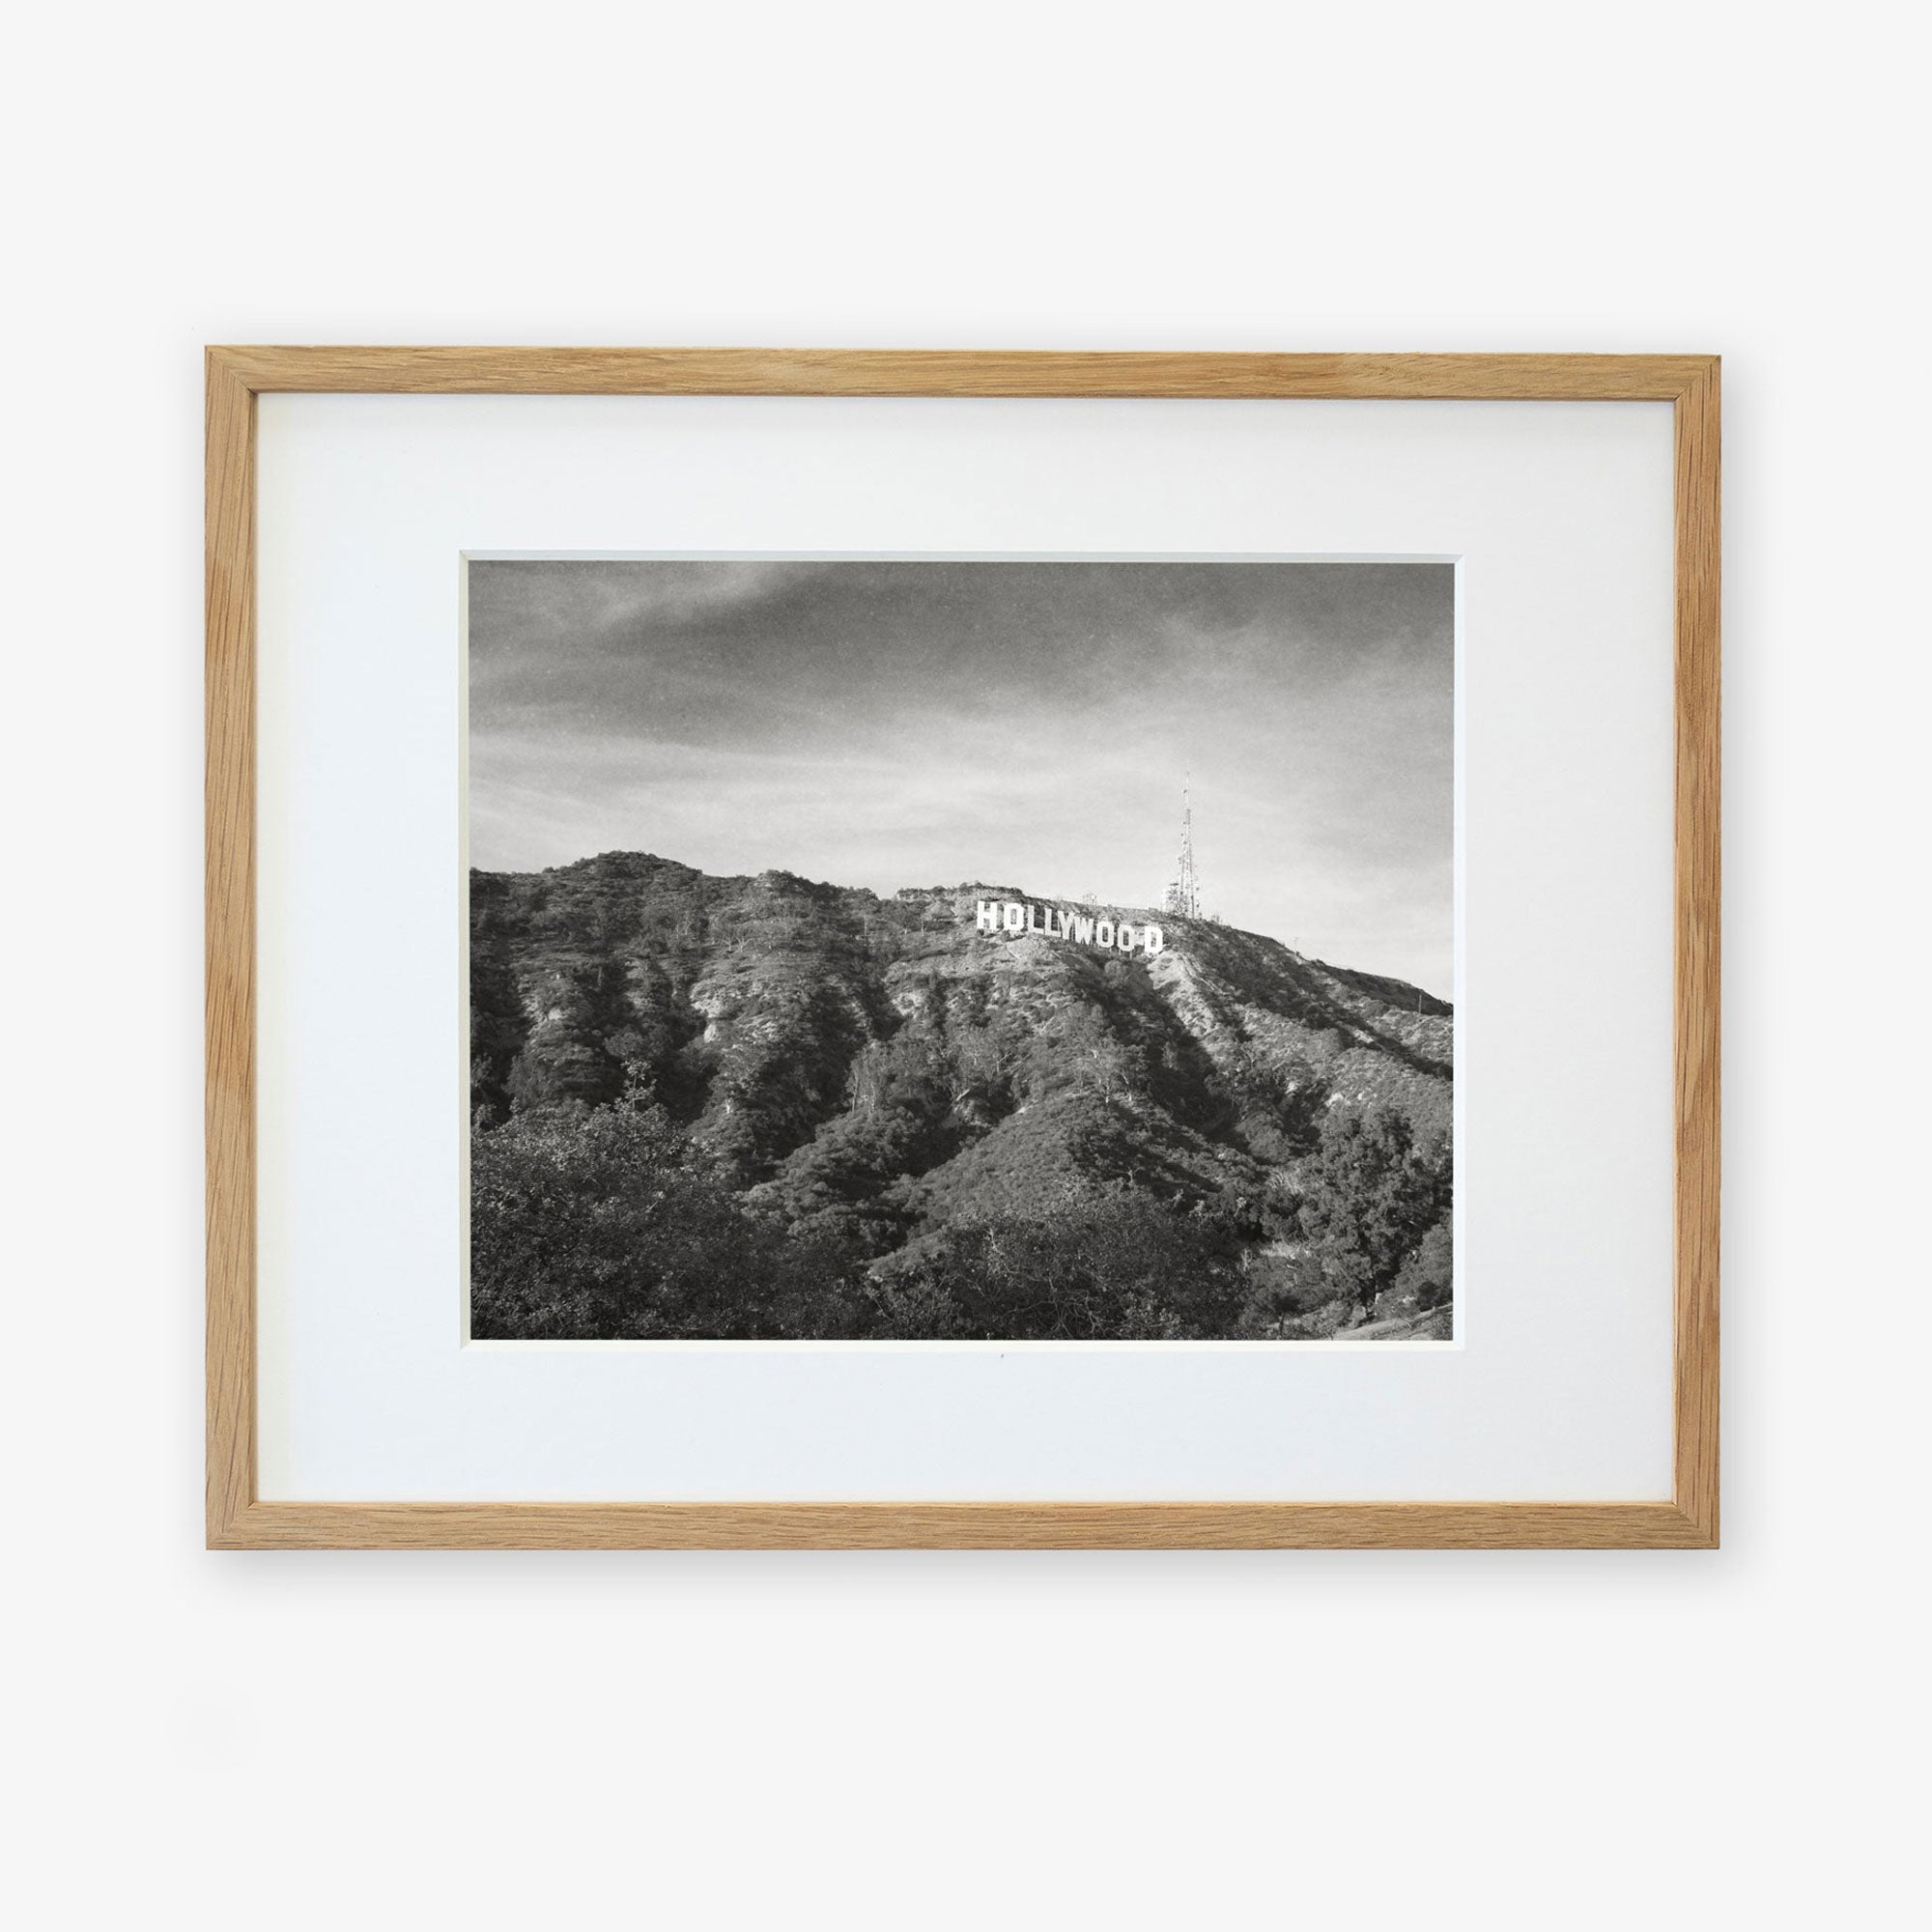 Black and white photograph of the Hollywood sign on a hill, printed on archival photographic paper, framed in a light wooden frame, against a plain white background.
Product Name: Offley Green Hollywood Sign Black and White Vintage Print, &#39;Old Hollywood&#39;